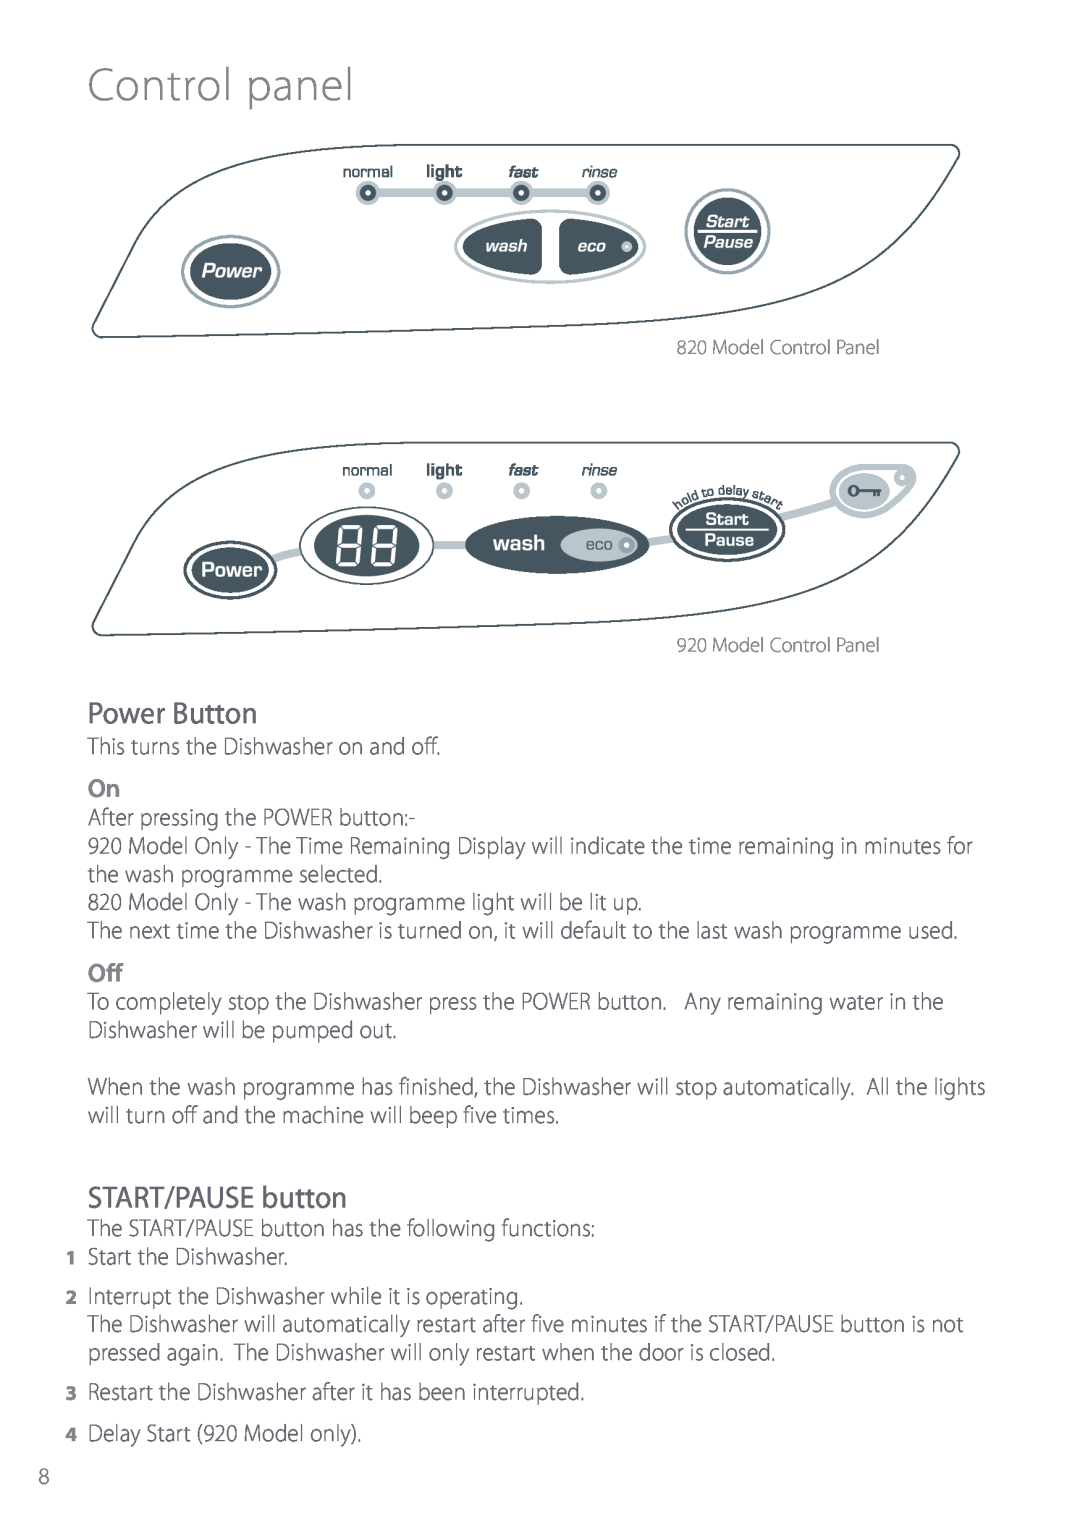 Fisher & Paykel DW920, DW820 installation instructions Control panel, Power Button, START/PAUSE button 